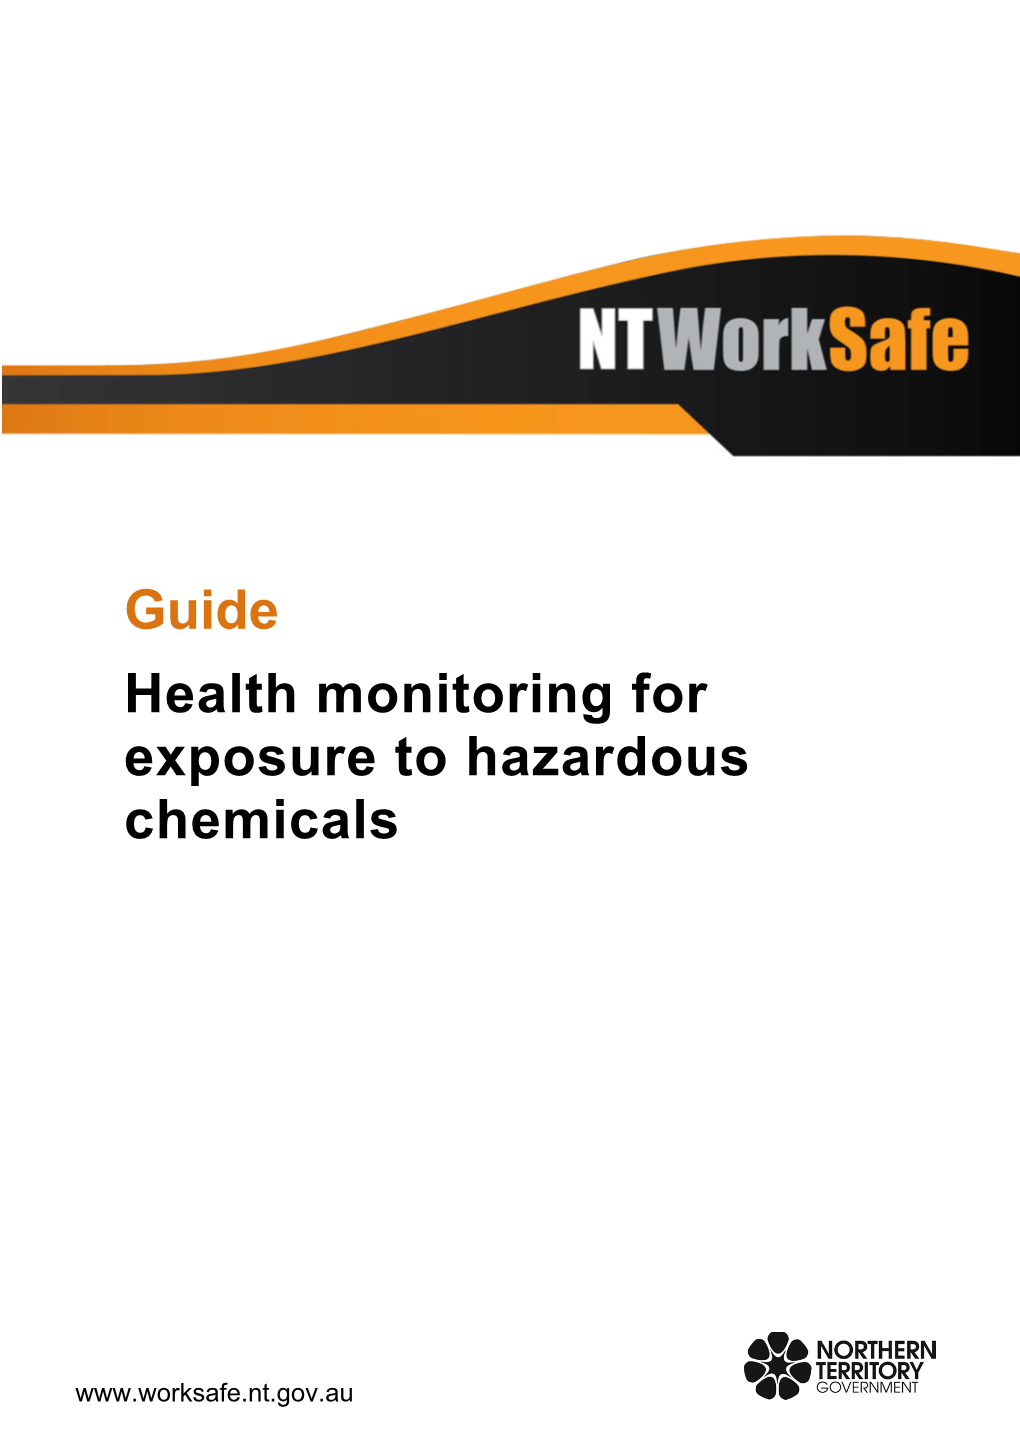 Guide Health Monitoring for Exposure to Hazardous Chemicals